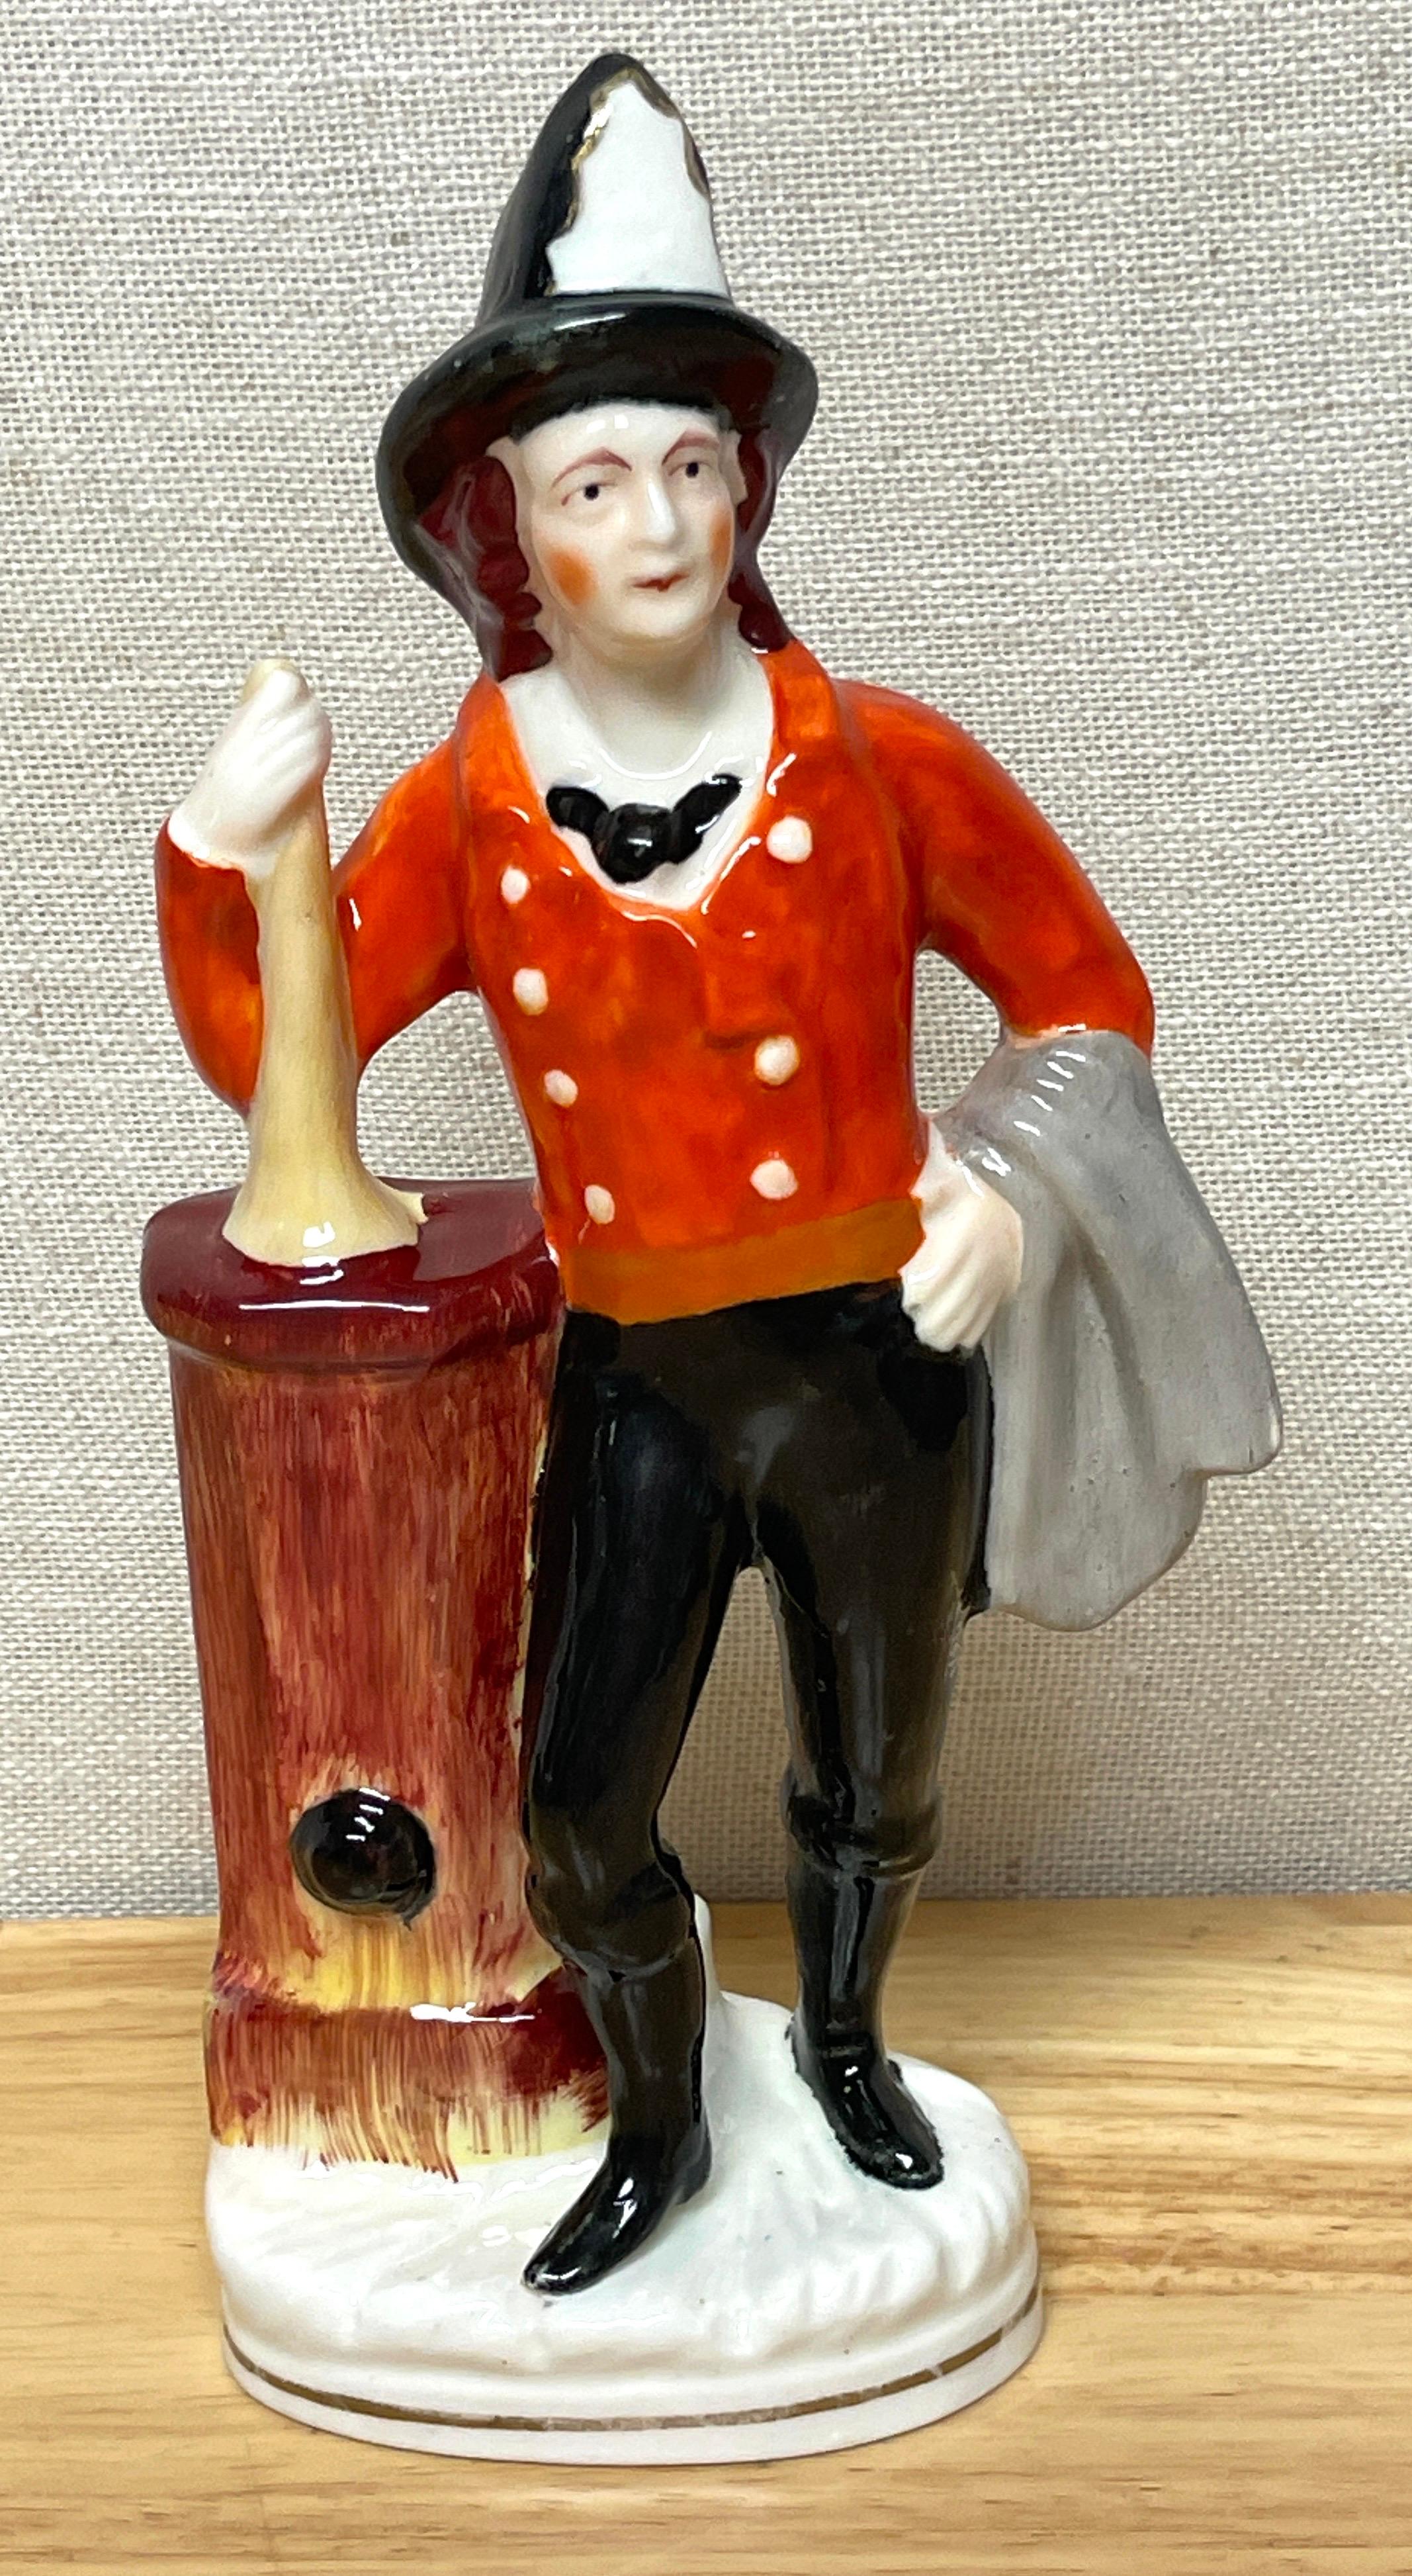 19th century Staffordshire figure of 'American Fireman'
England, Circa 1860s
A rare example, well painted and modeled of a fireman in uniform leaning against a water pump holding a horn in the left arm. The right arm is draped with a cloth. 
The